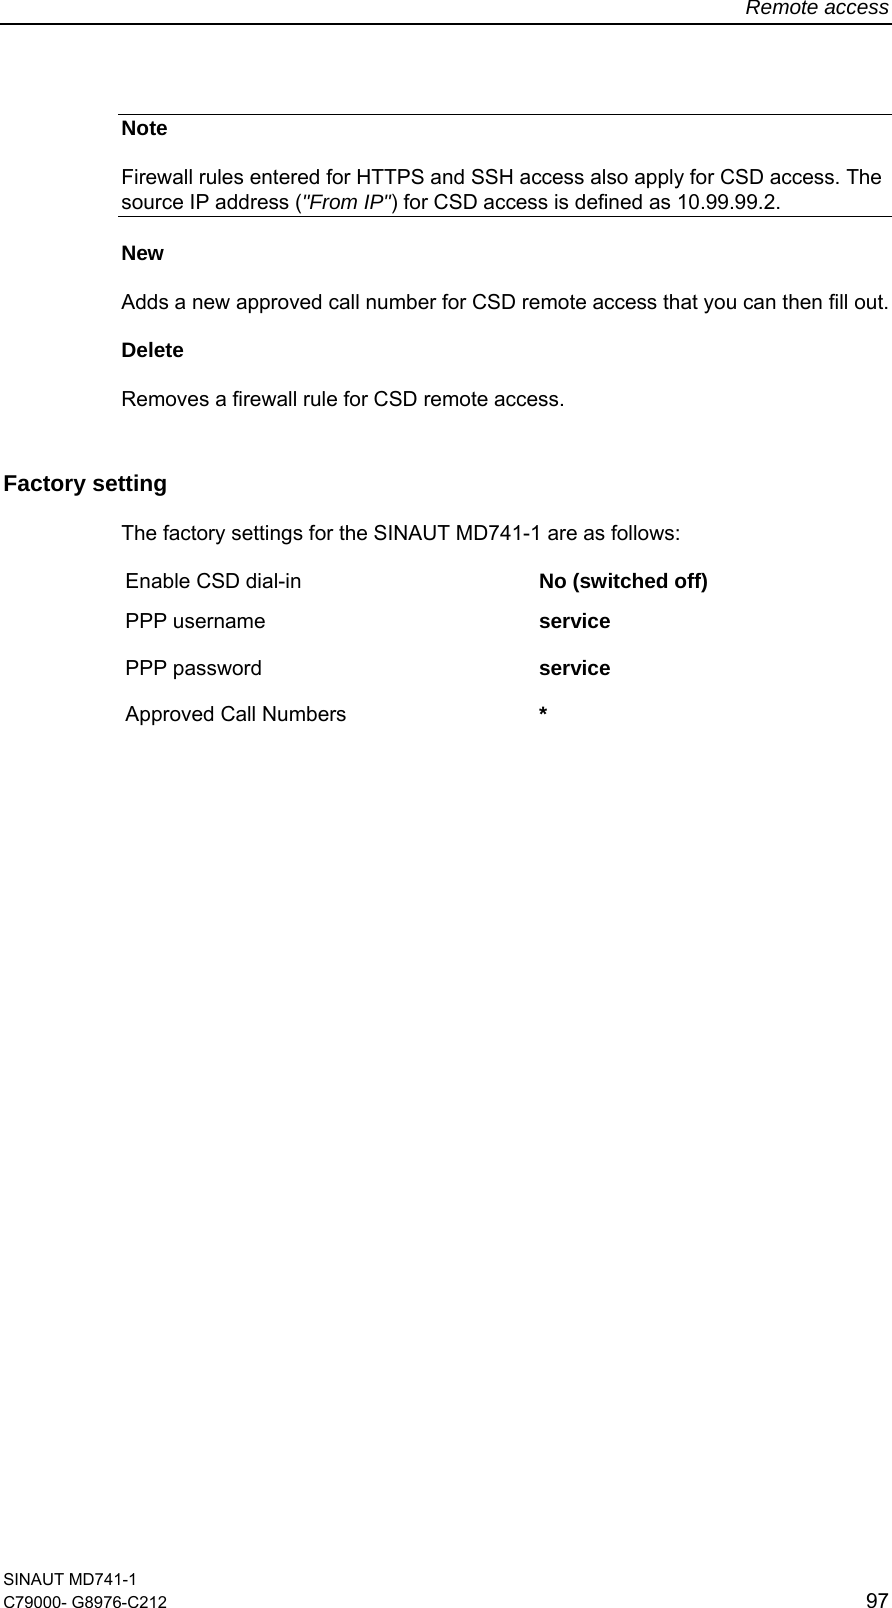 Remote access SINAUT MD741-1 C79000- G8976-C212  97  Note Firewall rules entered for HTTPS and SSH access also apply for CSD access. The source IP address (&quot;From IP&quot;) for CSD access is defined as 10.99.99.2. New  Adds a new approved call number for CSD remote access that you can then fill out. Delete  Removes a firewall rule for CSD remote access. Factory setting  The factory settings for the SINAUT MD741-1 are as follows: Enable CSD dial-in  No (switched off) PPP username  service PPP password  service  Approved Call Numbers  *   